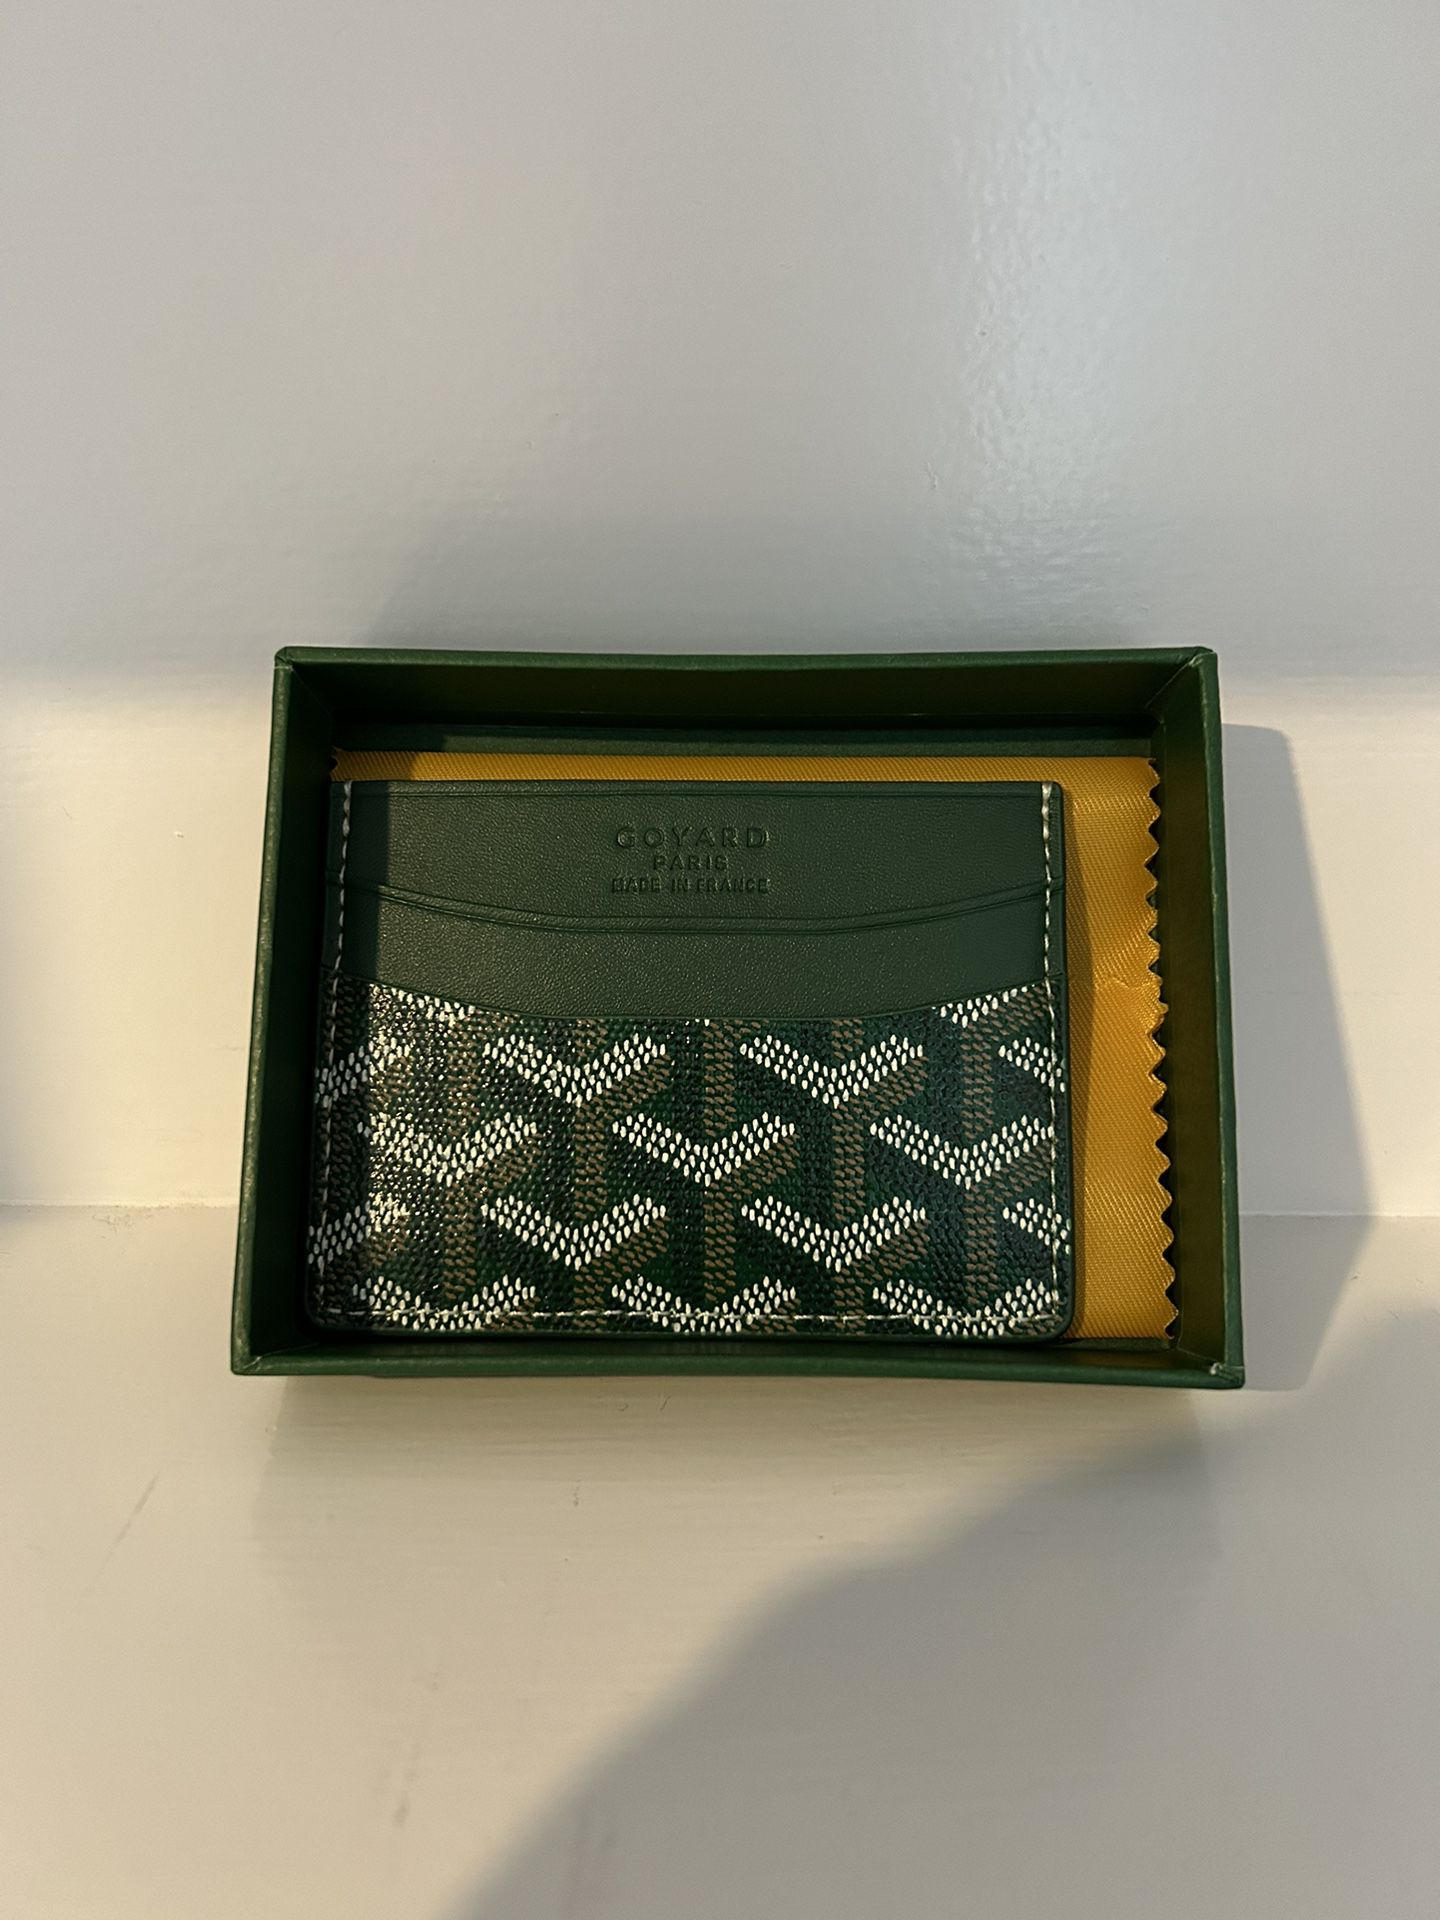 Goyard Saint Sulpice Card Holder Green Ships Same Day Or Next Day Very Good Condition  (Send Best Offer)